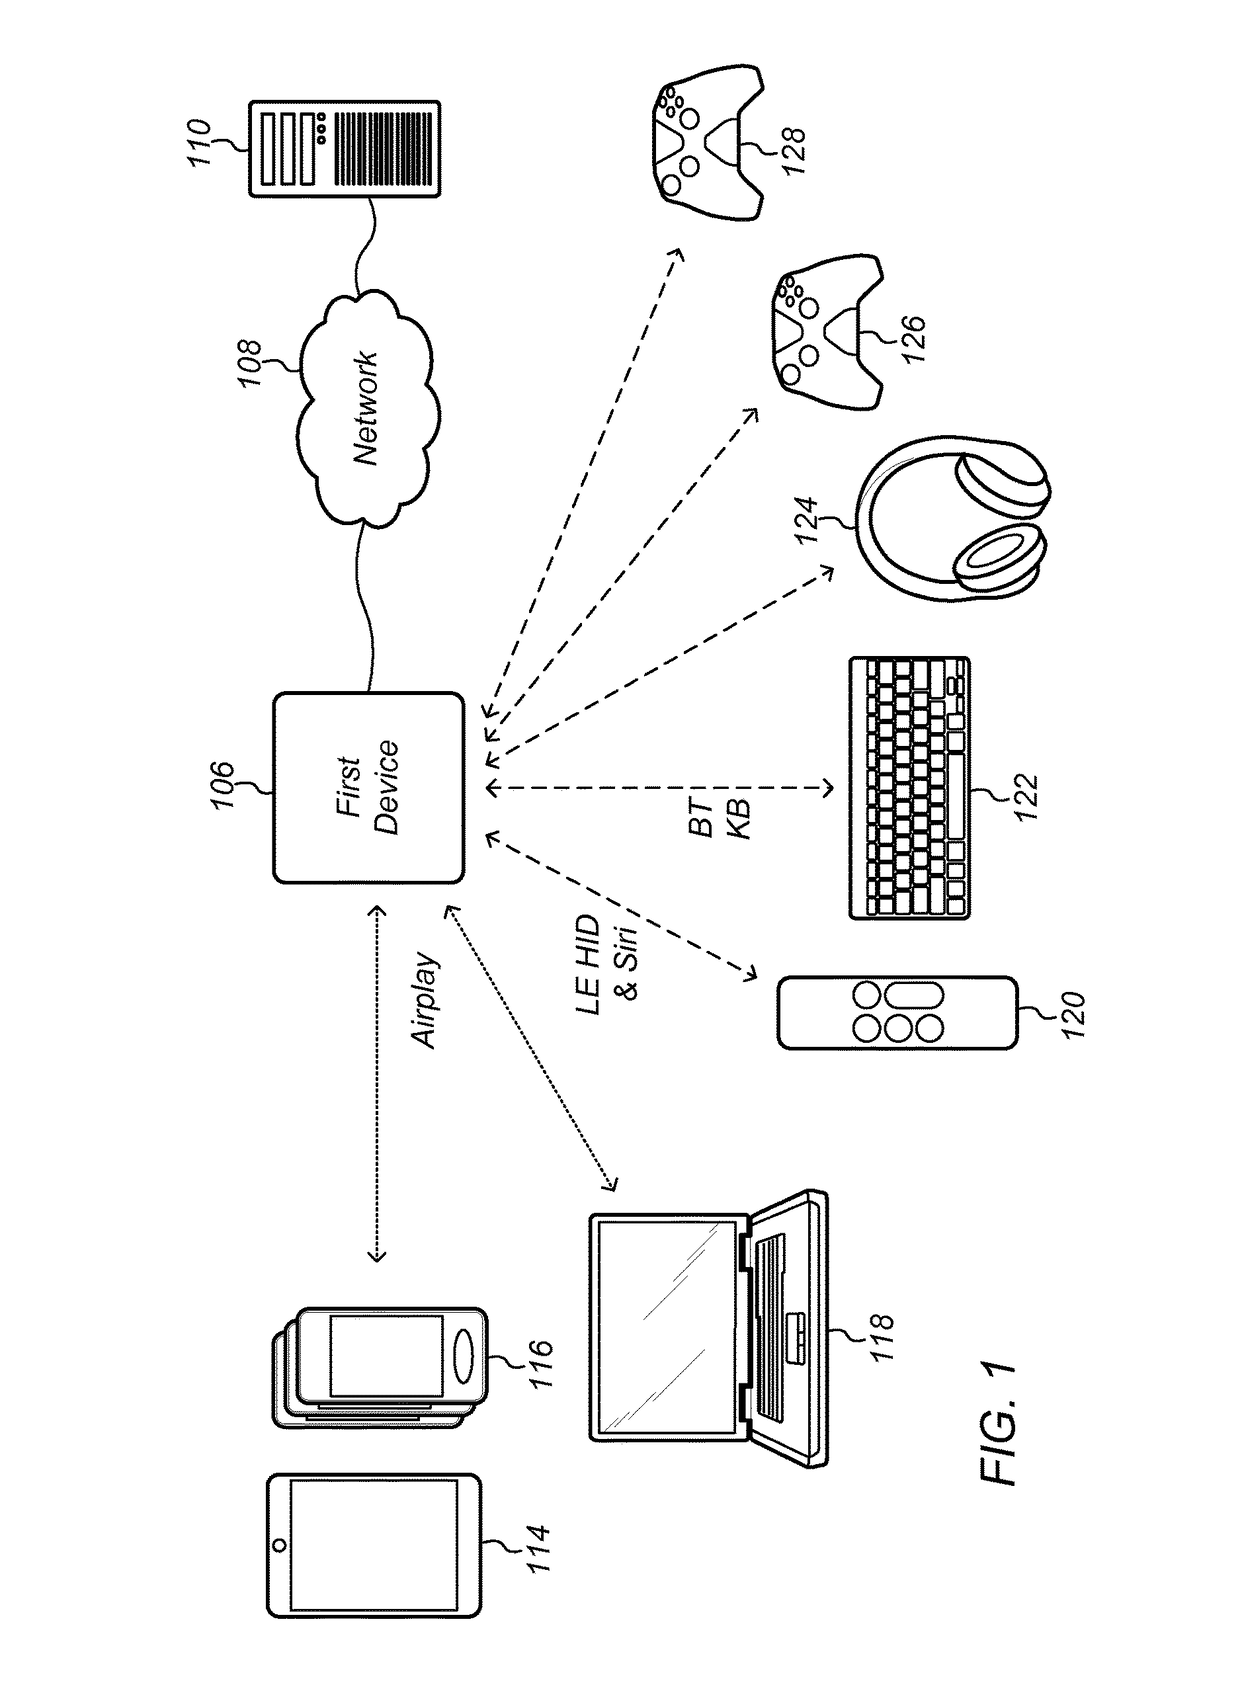 Cloud-based proximity pairing and switching for peer-to-peer devices